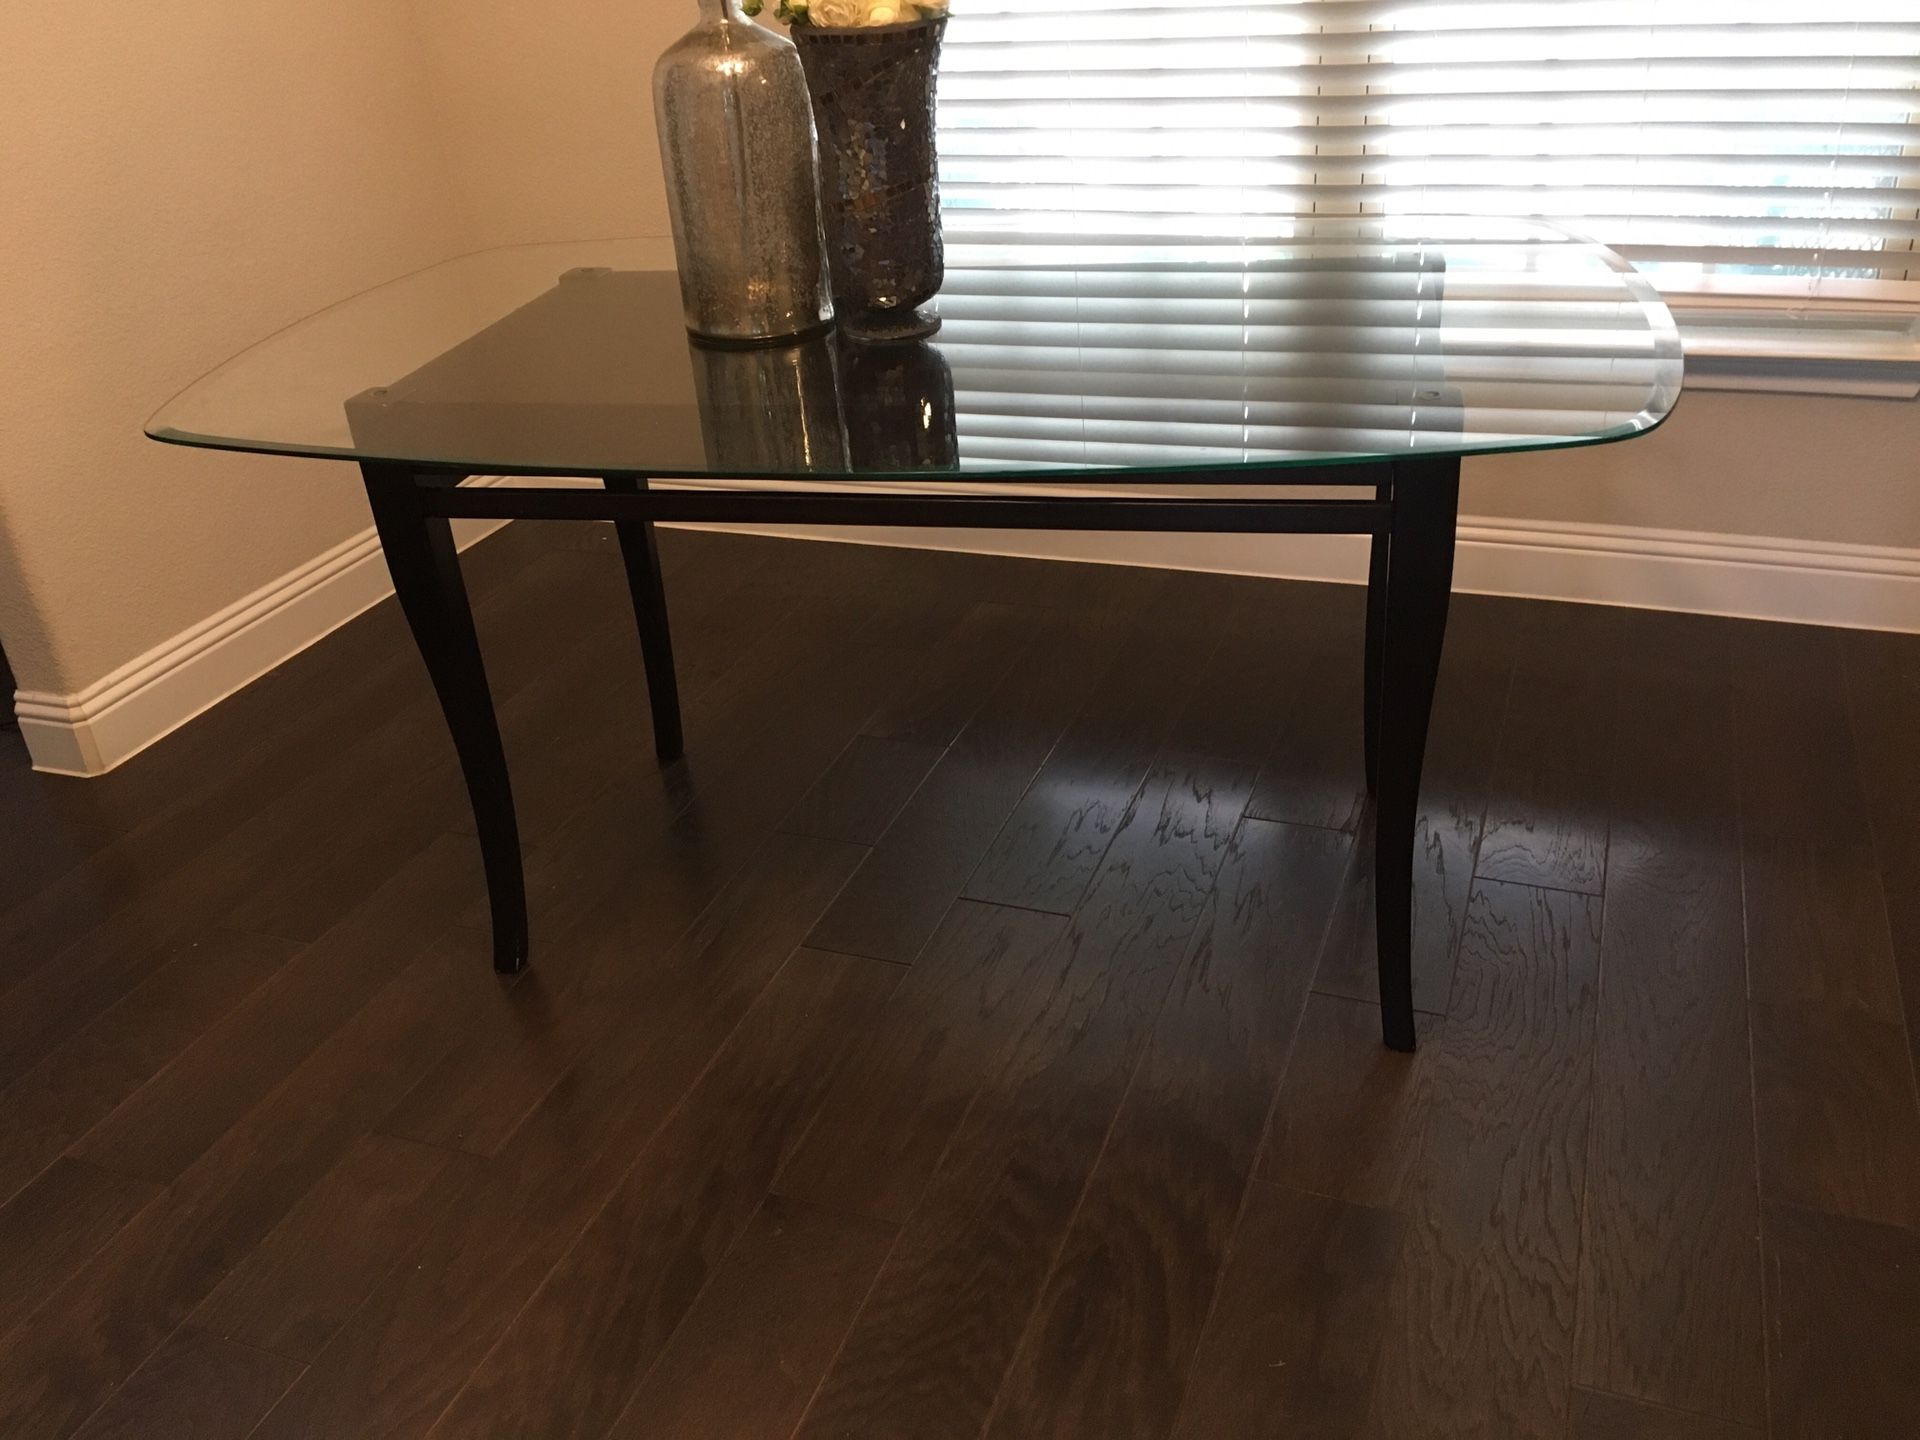 Glass kitchen table